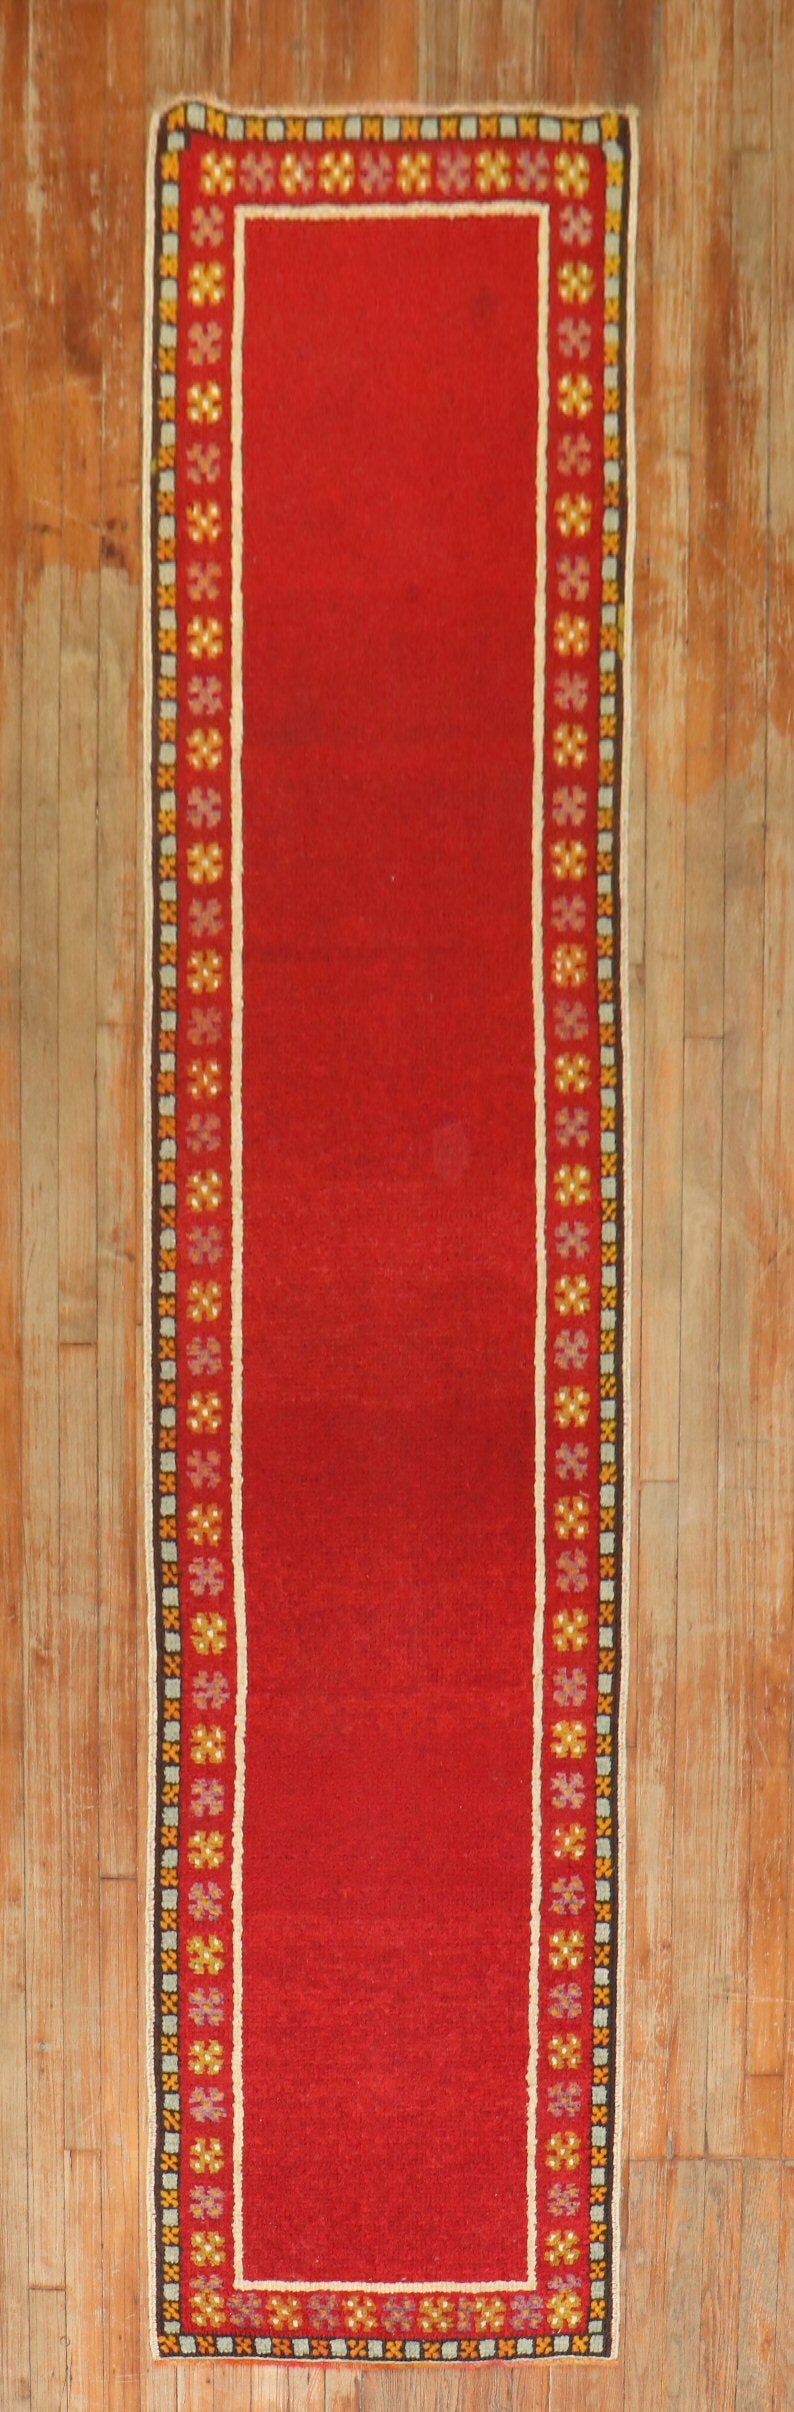 Bright red vintage Turkish Tulu runner with a plain open field design and narrow floral border.

Measures: 2'5